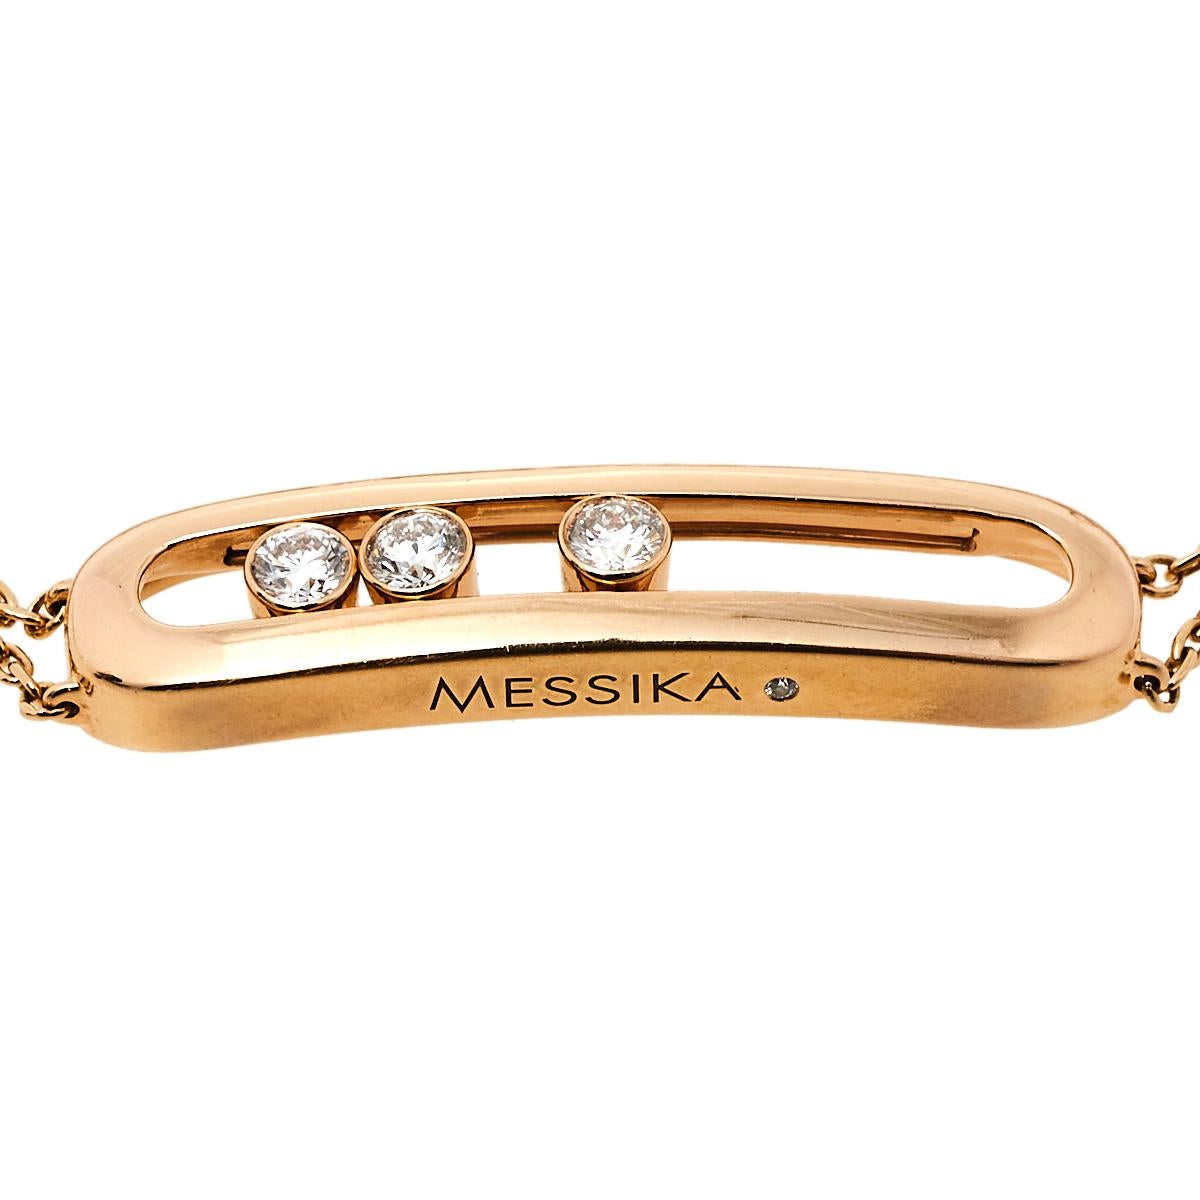 The Move is an iconic collection of the house Messika, a line that embodies love and romance through three moving diamonds set in simple designs. This beautiful bracelet is fully handcrafted from 18k rose gold into a minimal yet timeless silhouette